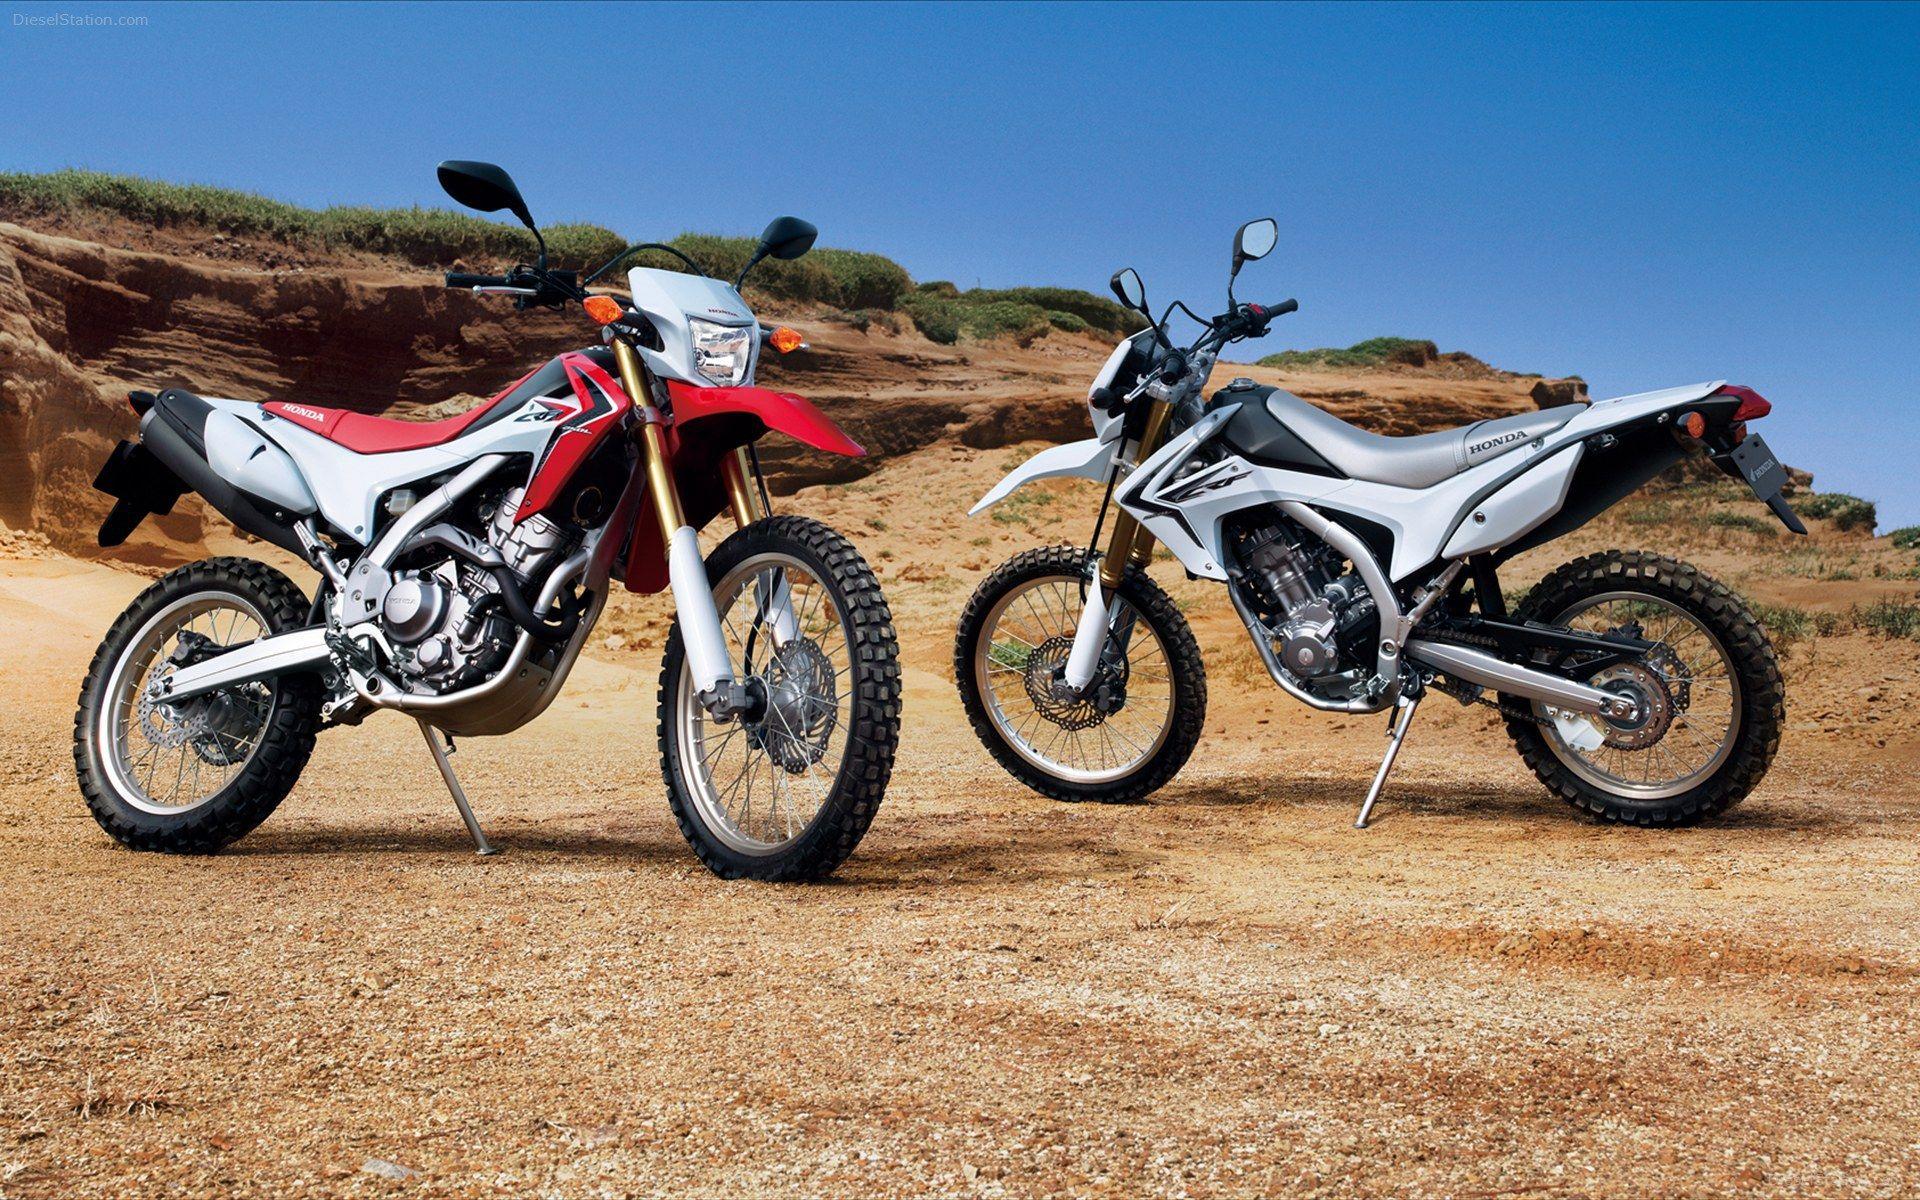 New reliable motorcycle Honda CRF 250 L wallpaper and image